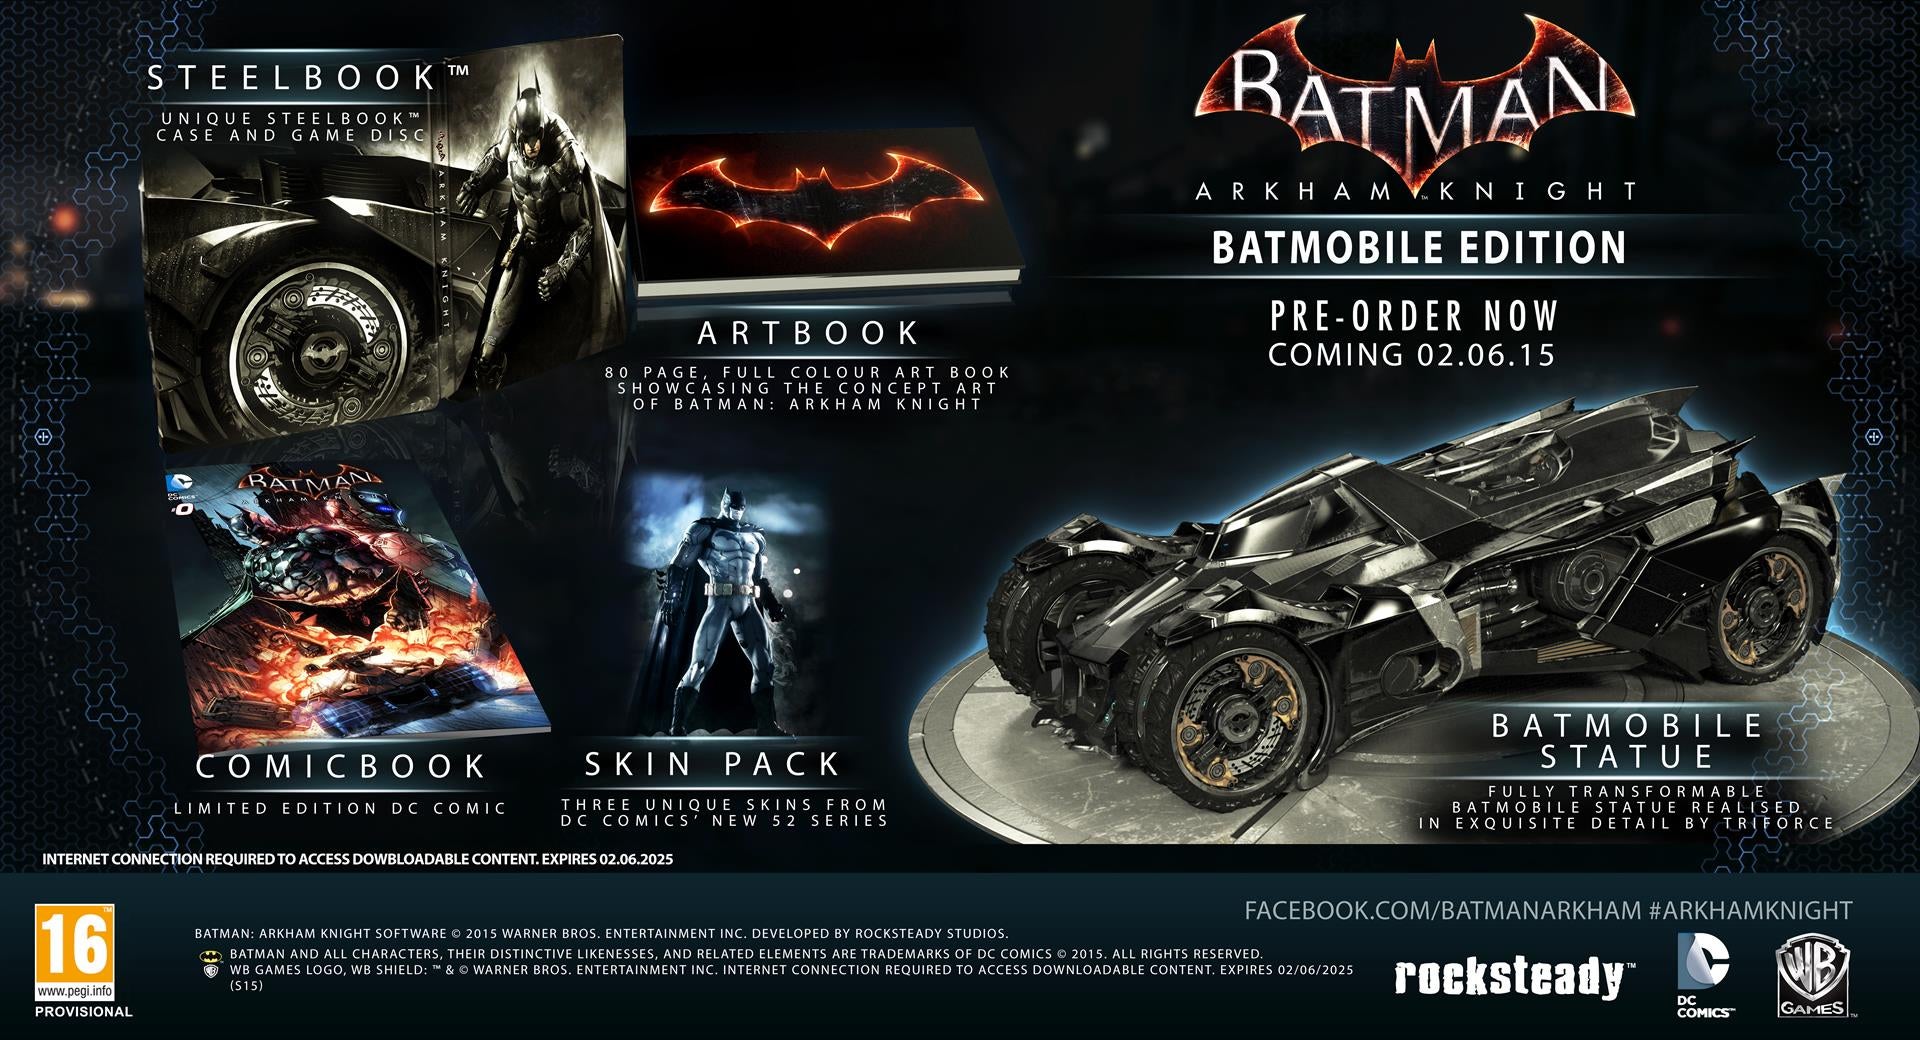 Image for Batman: Arkham Knight has two collector's editions - get all the details